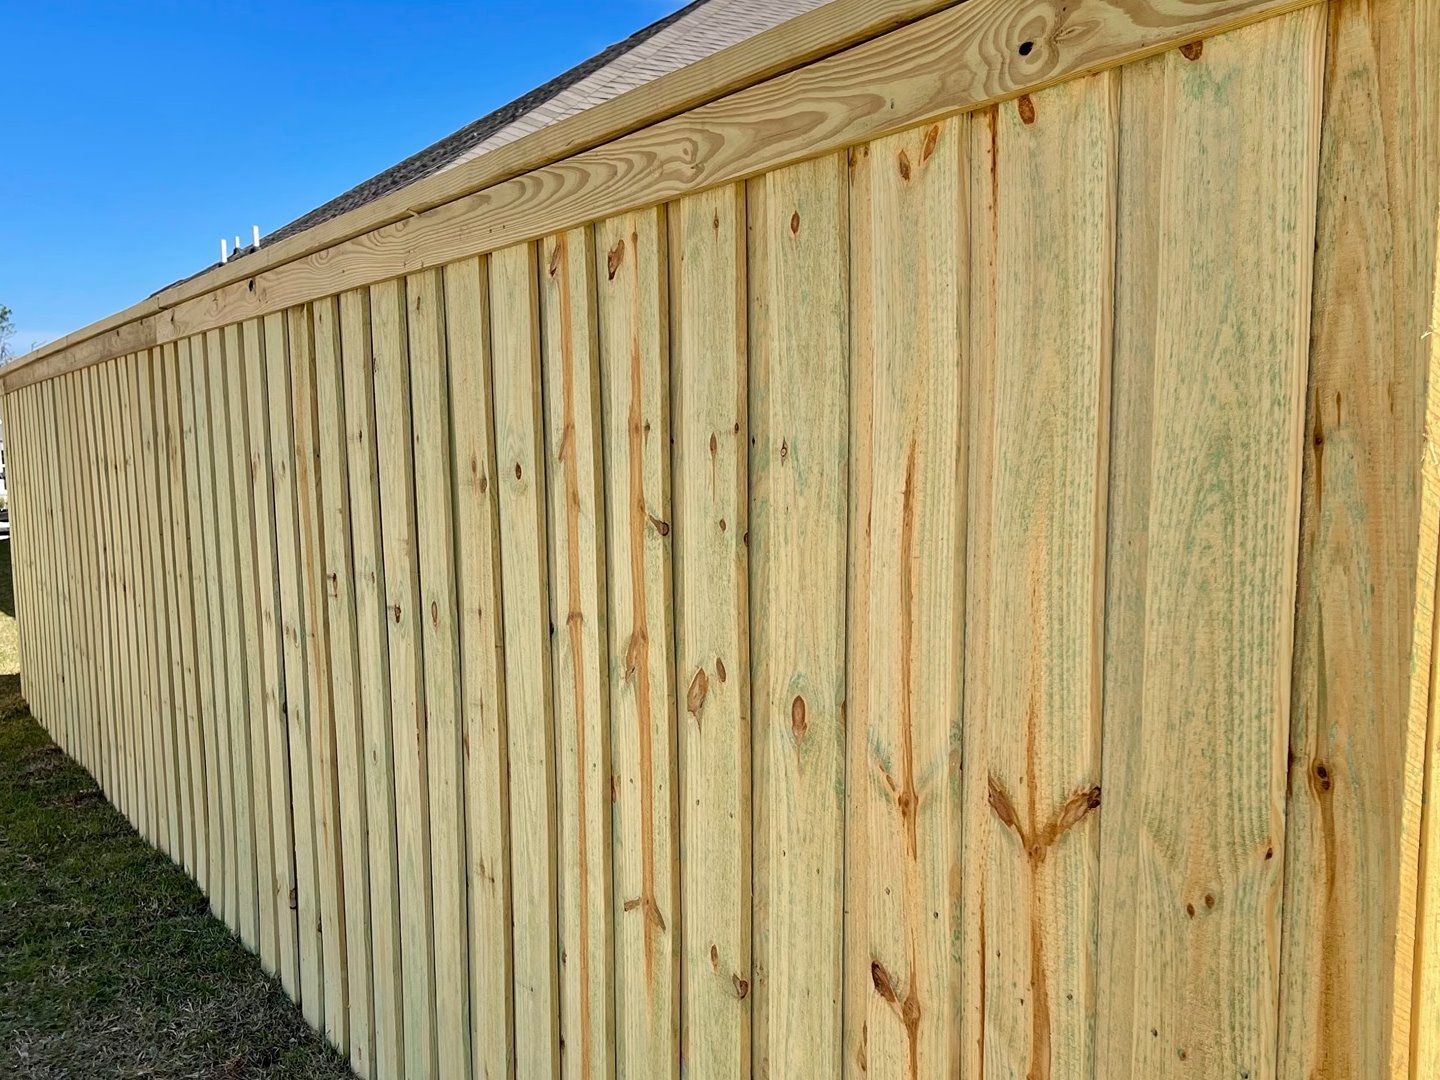 Hastings Florida wood privacy fencing